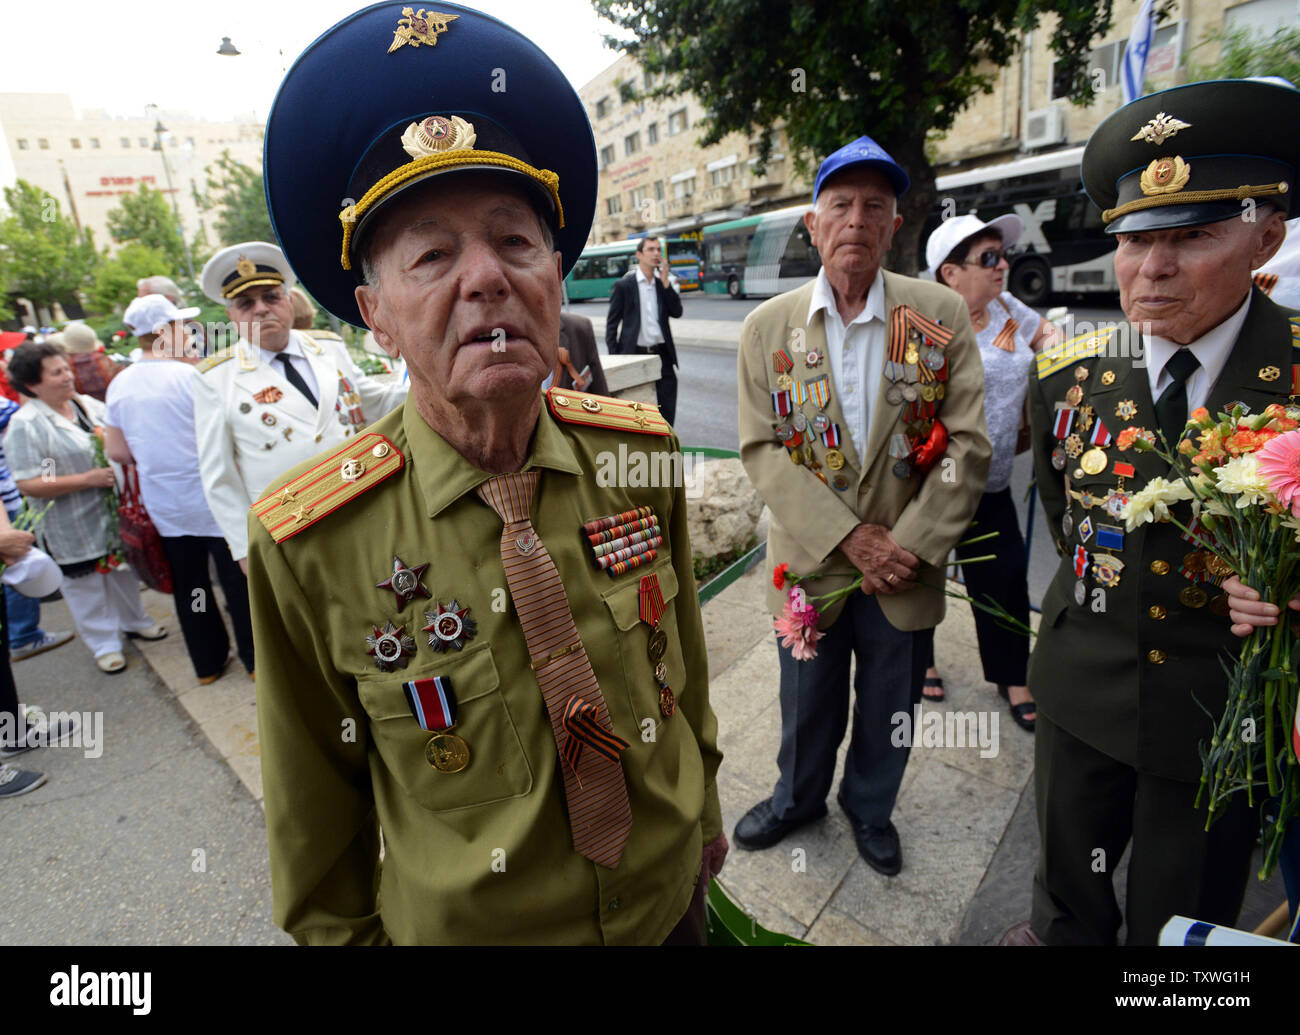 Soviet Jewish World War II Veterans wear their Red Army uniforms and medals  at a march in Jerusalem, Israel, to commemorate Victory Day, marking the  68th anniversary of the defeat of Nazi